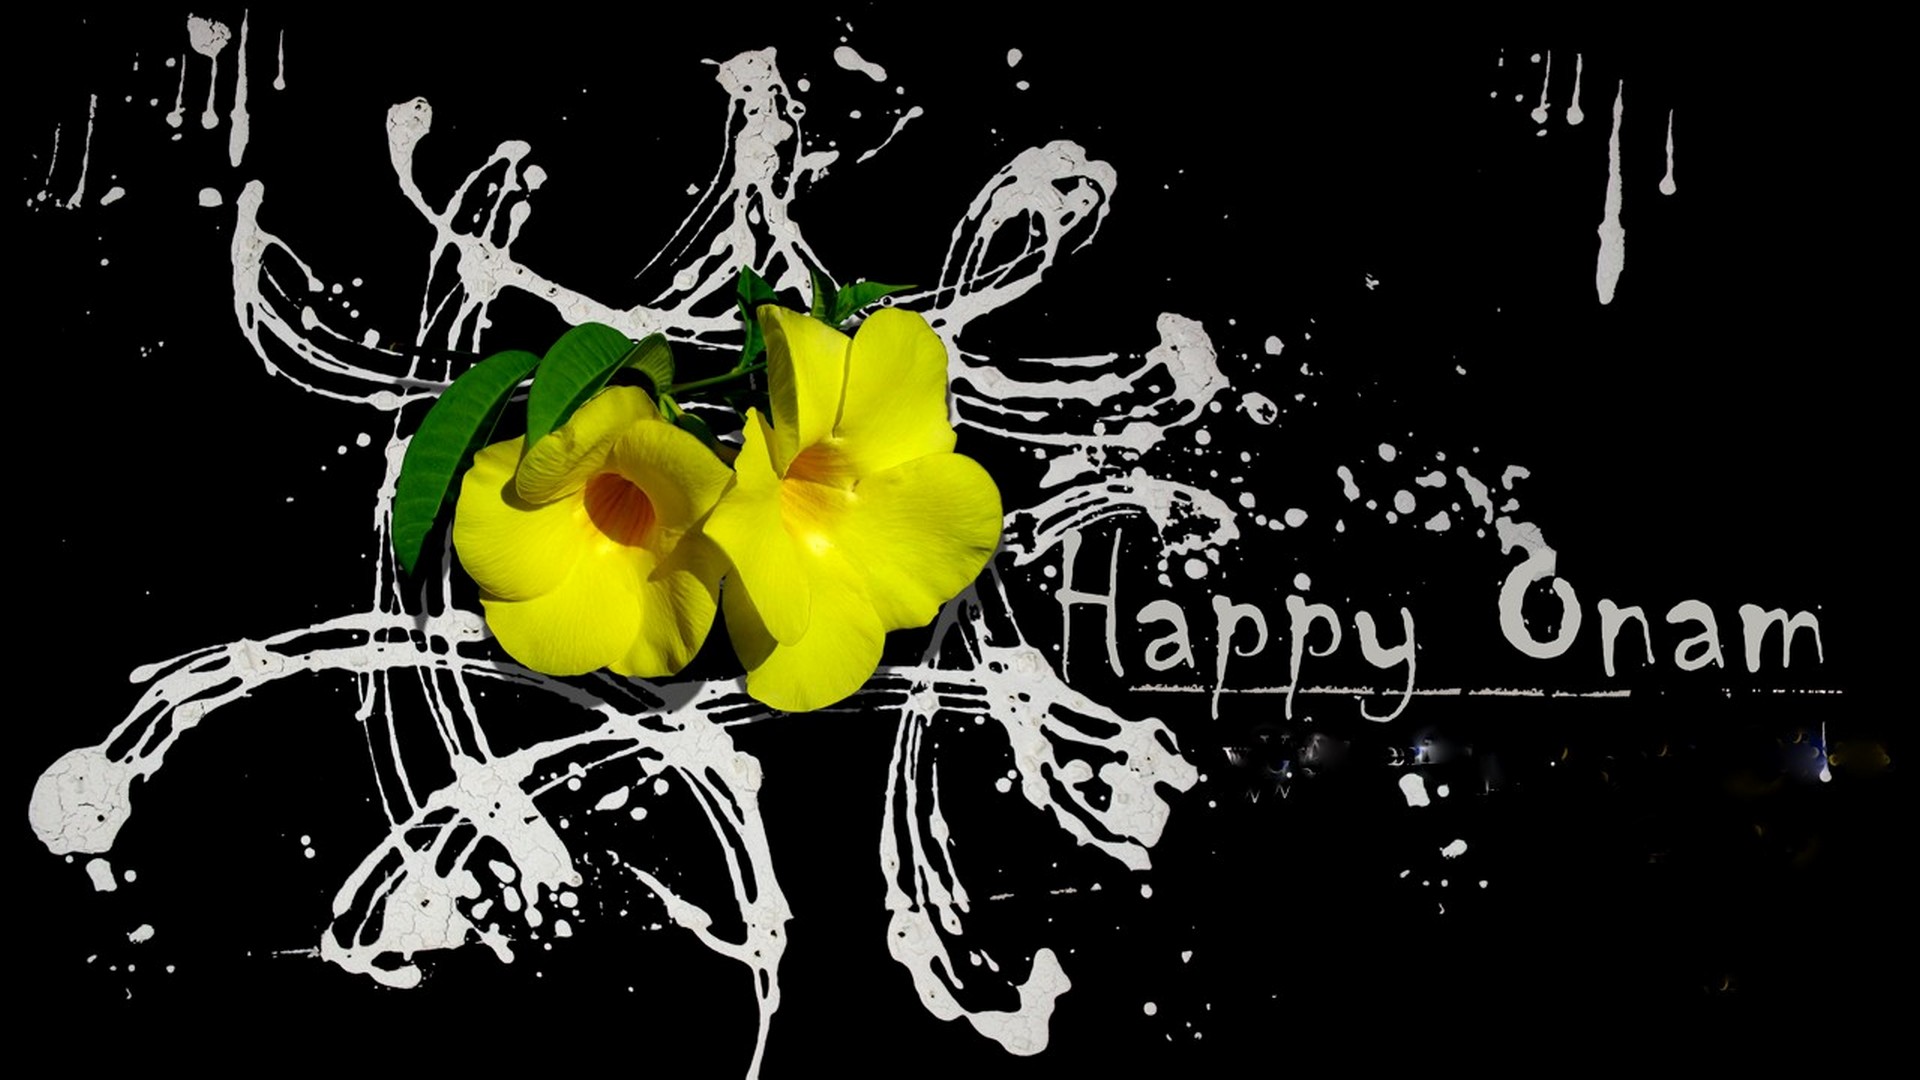 Desktop Wallpaper Black and Yellow with resolution 1920X1080 pixel. You can use this wallpaper as background for your desktop Computer Screensavers, Android or iPhone smartphones